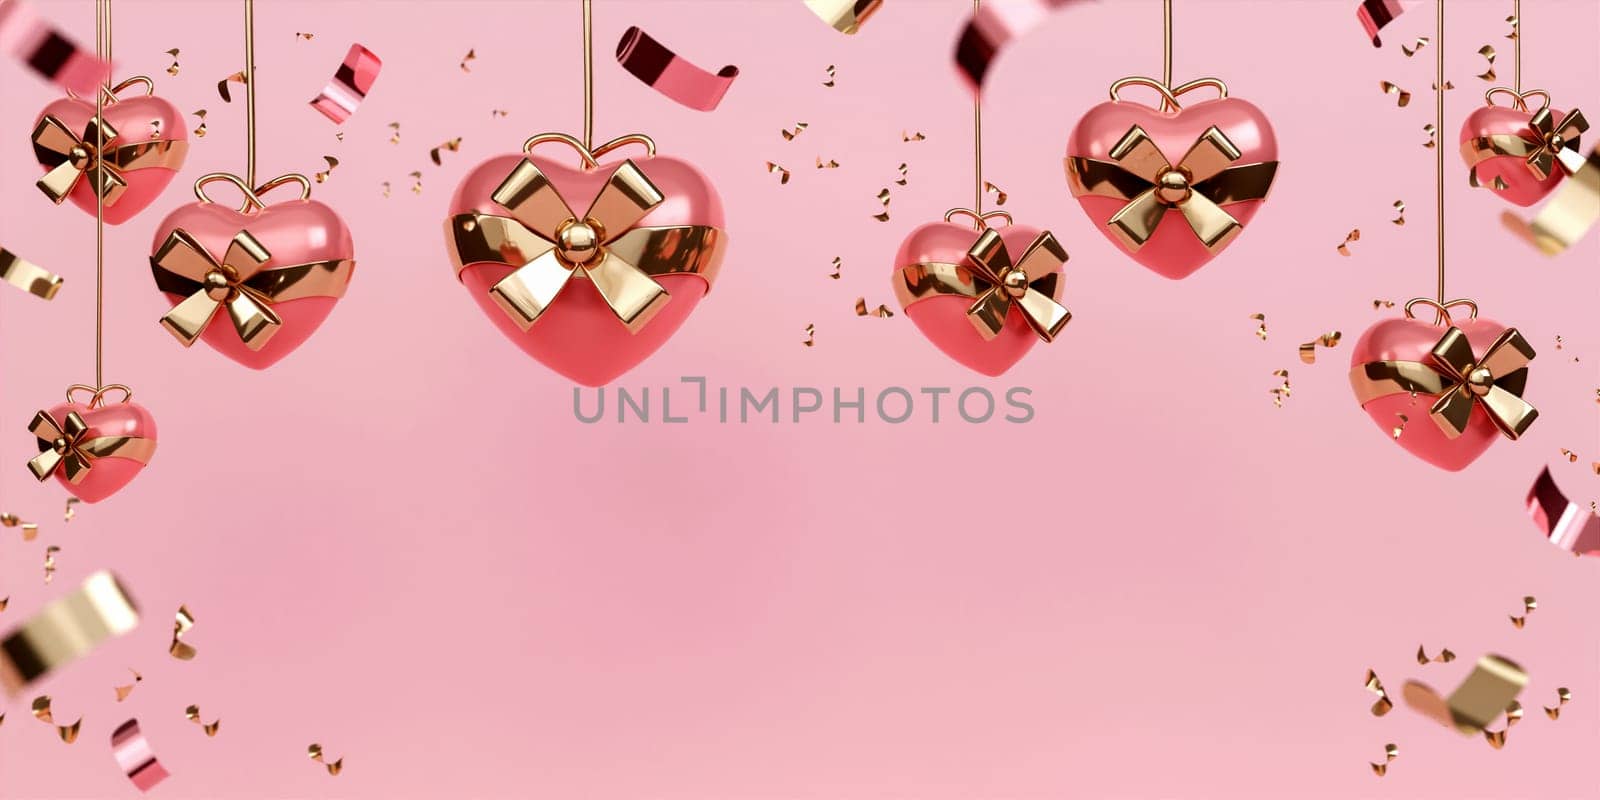 Valentines Day with hanging gift box heart shape decor pink background. Holiday illustration banner with copy space. for valentine and mother day anniversary design. 3d rendering illustration by meepiangraphic